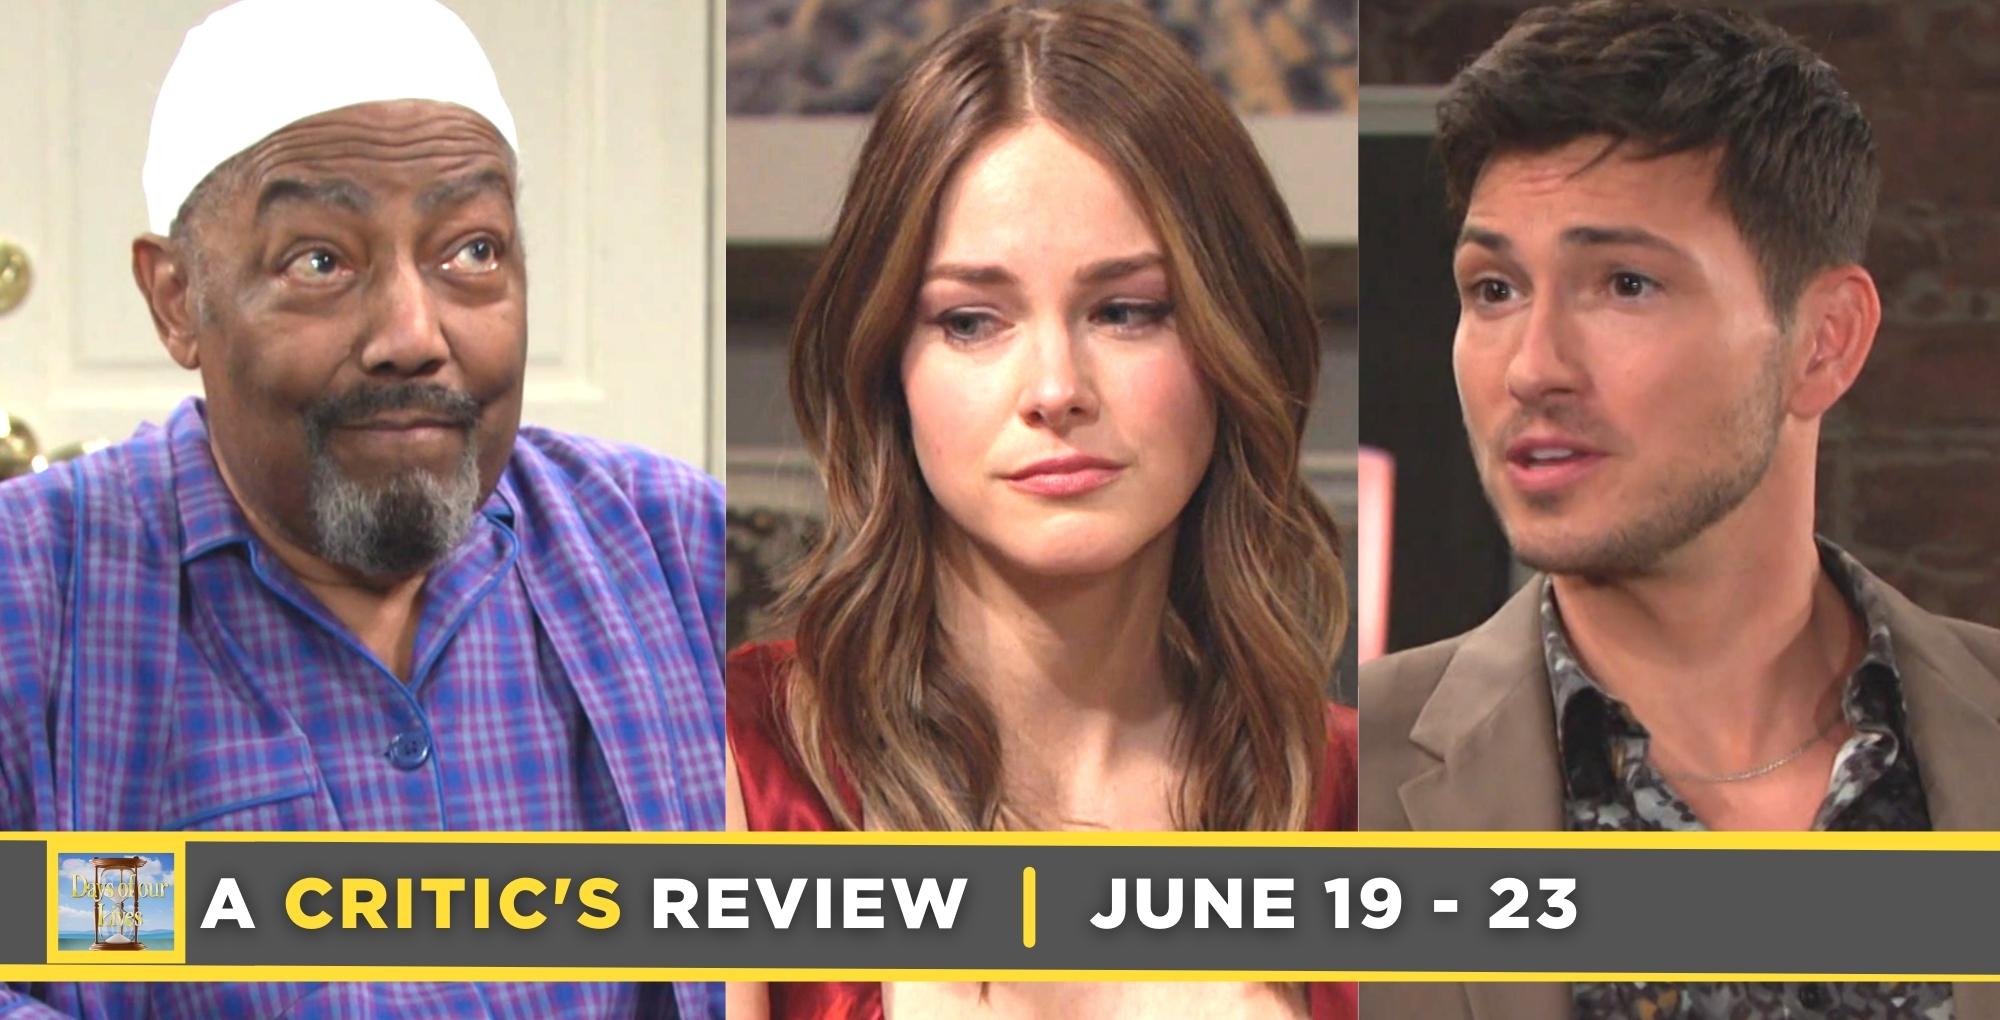 days of our lives critic's review for june 19 – june 23, 2023, three images abe, stephanie, and alex.